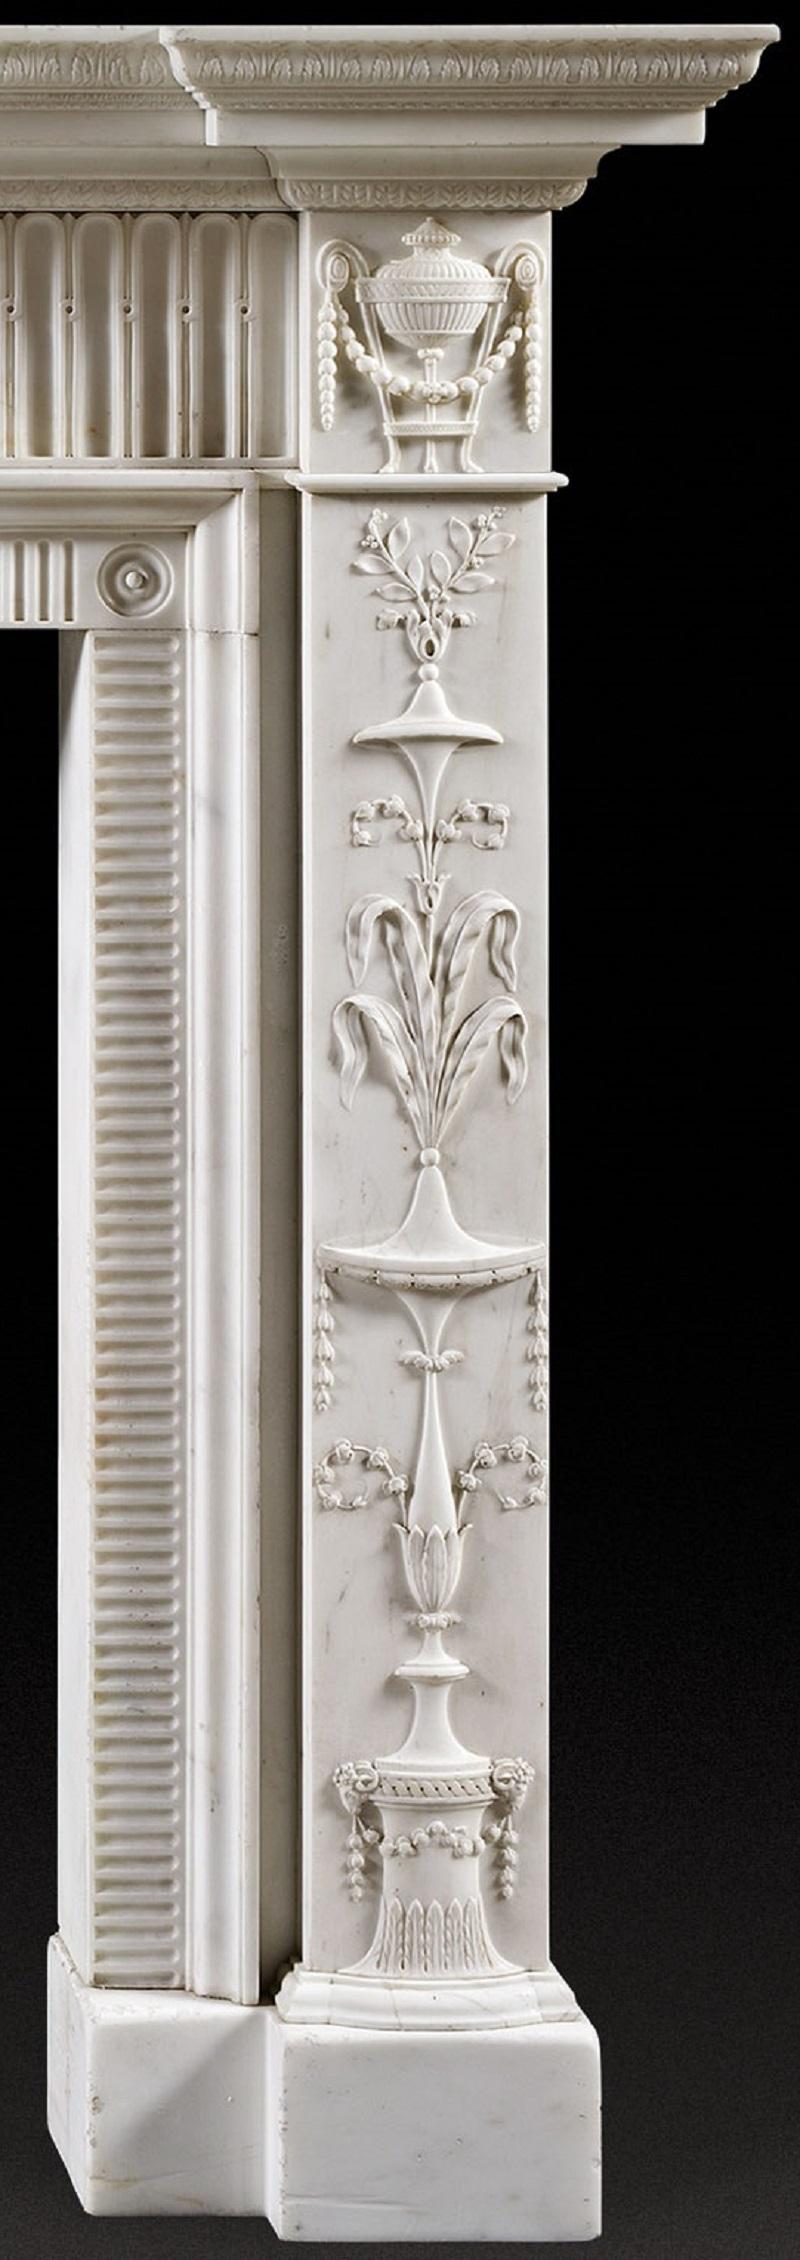 Carved Neoclassical Style Antique Fireplace Mantel For Sale